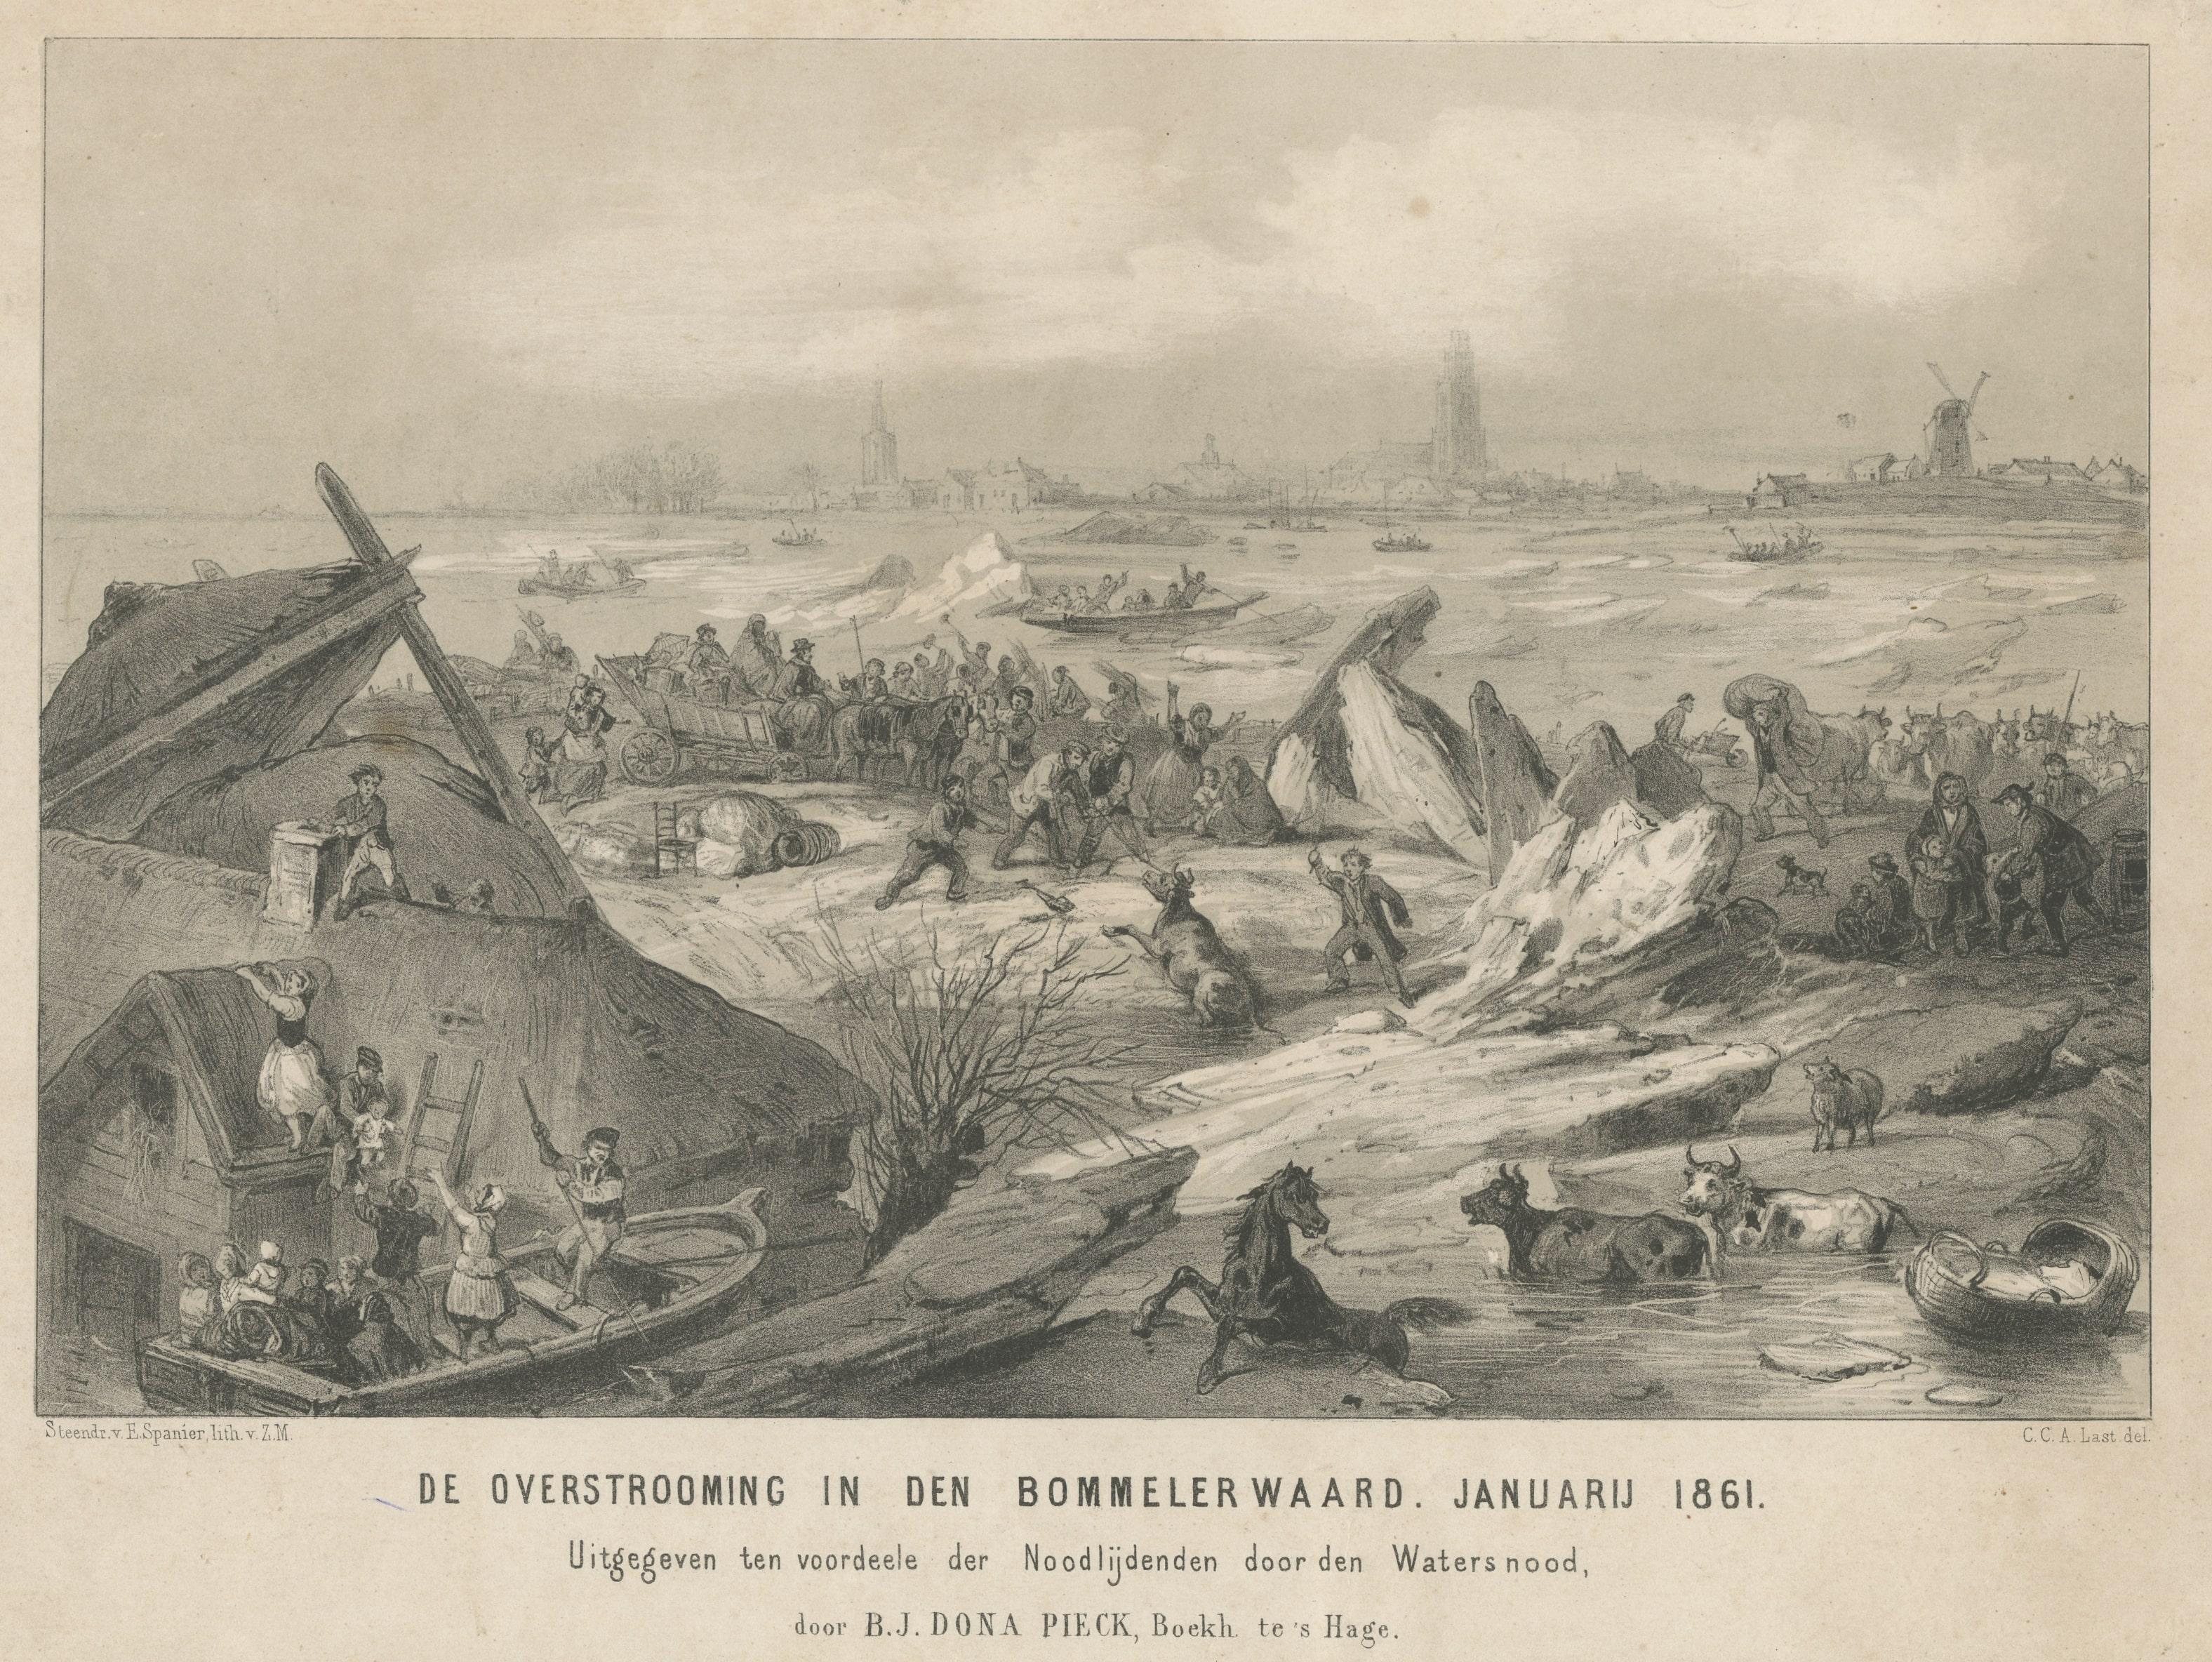 Antique print titled 'De Overstrooming in den Bommelerwaard, Januarij 1861'. 

View of the floods in Bommelerwaard, the Netherlands. 

Artists and Engravers: Engraved by C.C.A. Last. Published by B.J. Dona Pieck.